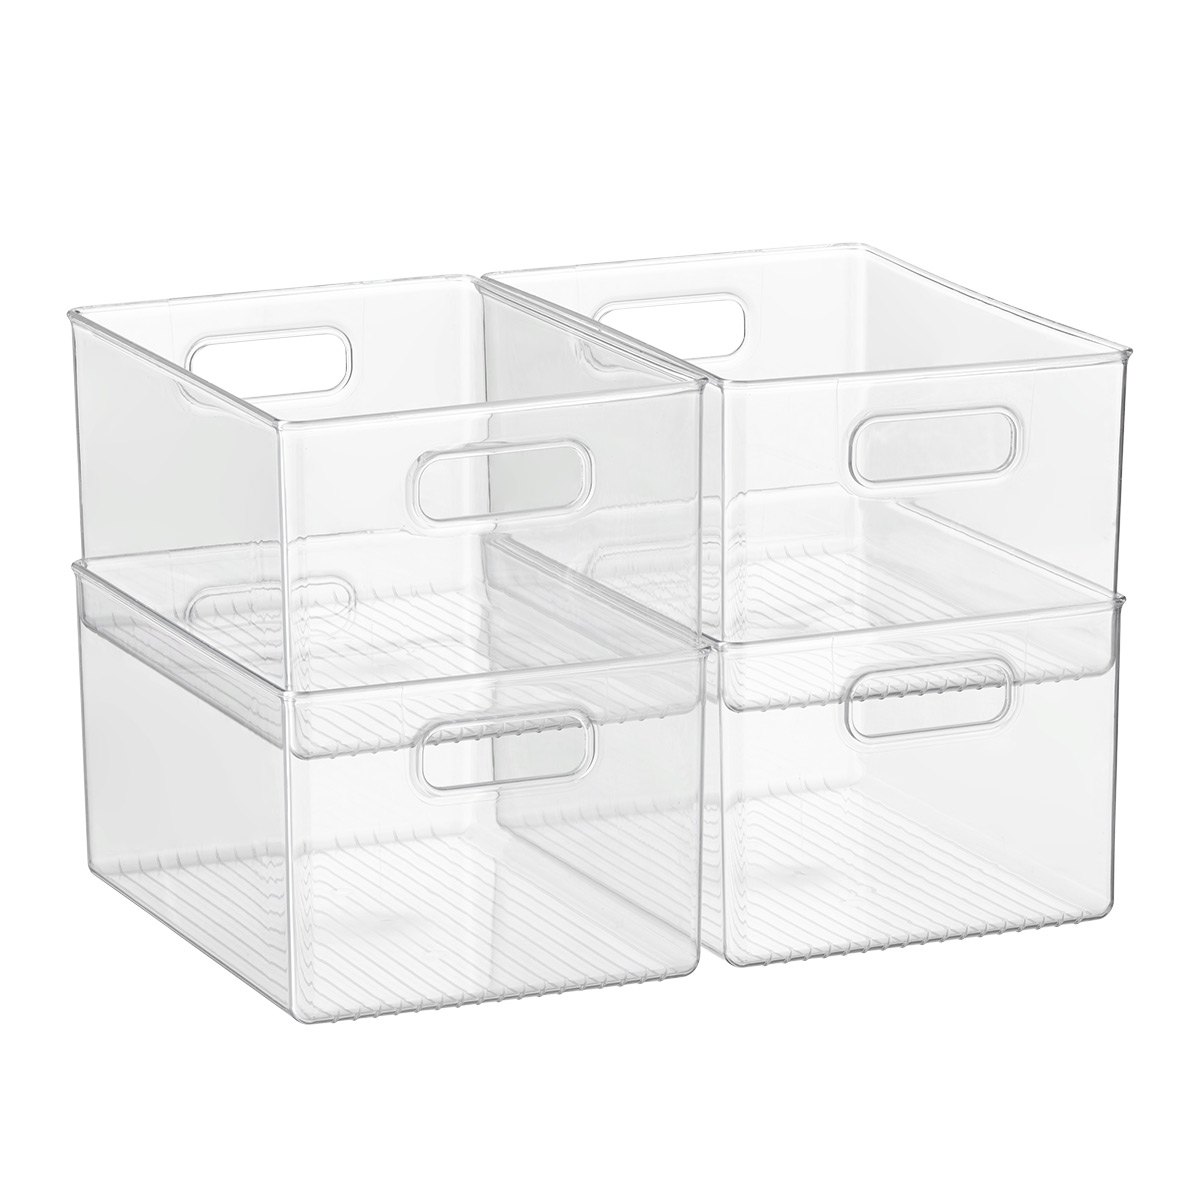 https://www.containerstore.com/catalogimages/490023/10090435-linus-pantry-bin-4ct.jpg